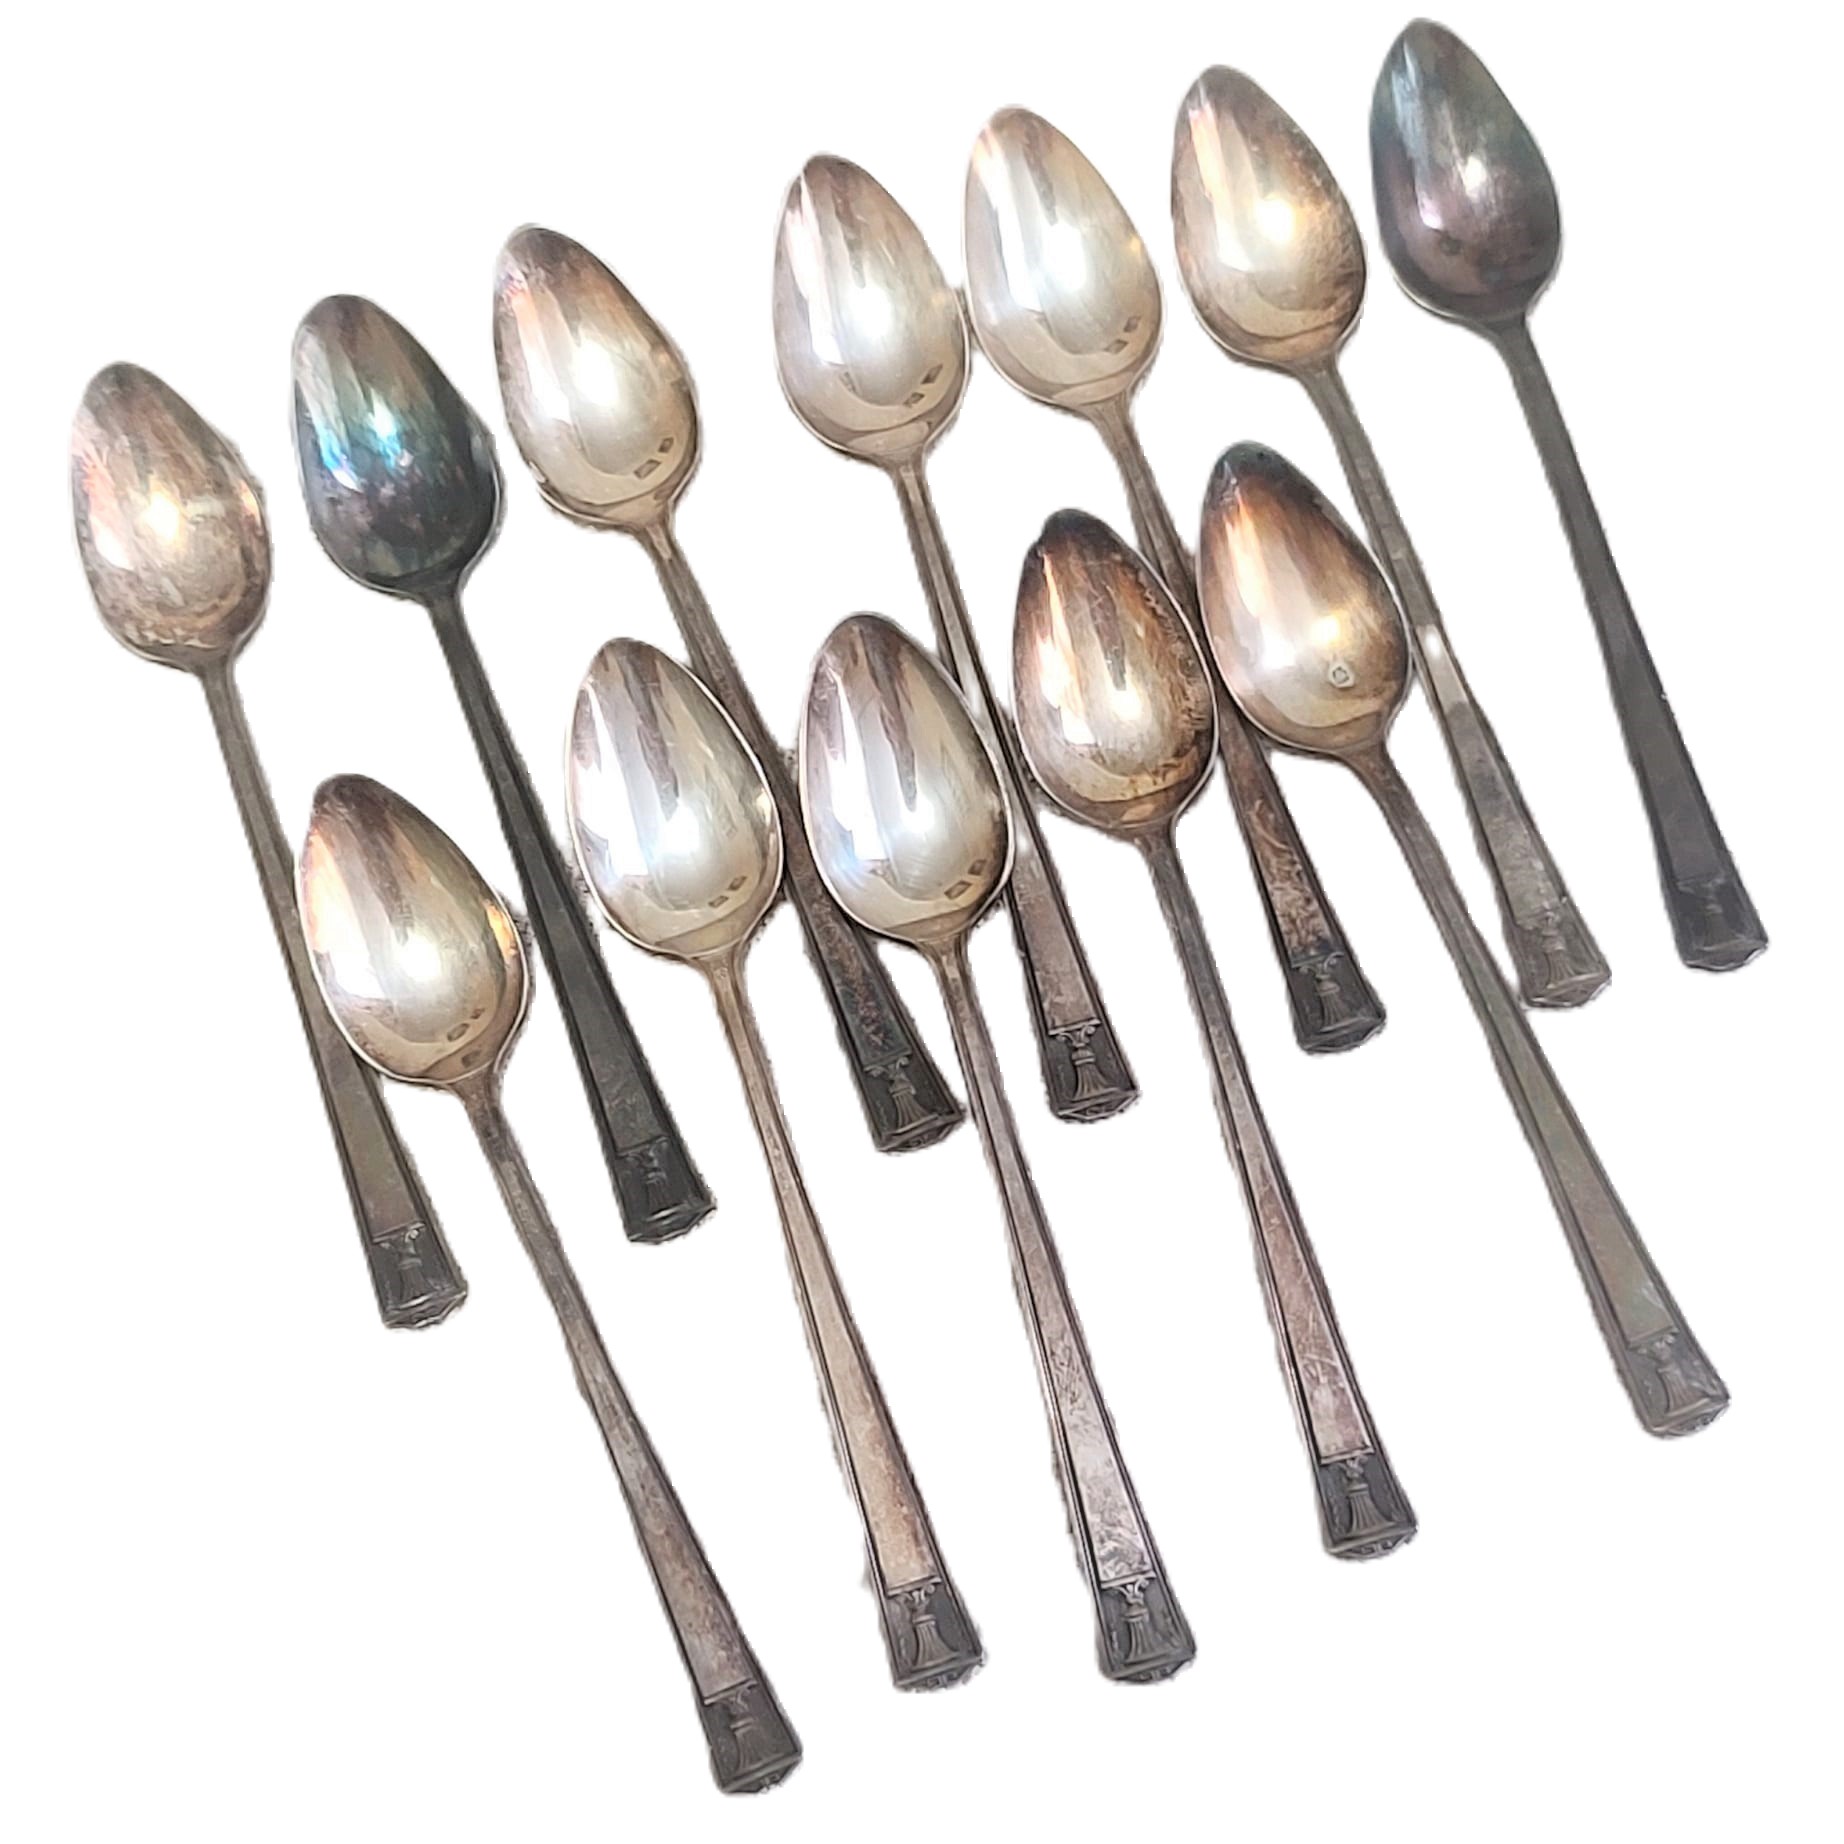 Vintage Silve Plated Tea Spoons Set of 12 Liberty Bell design